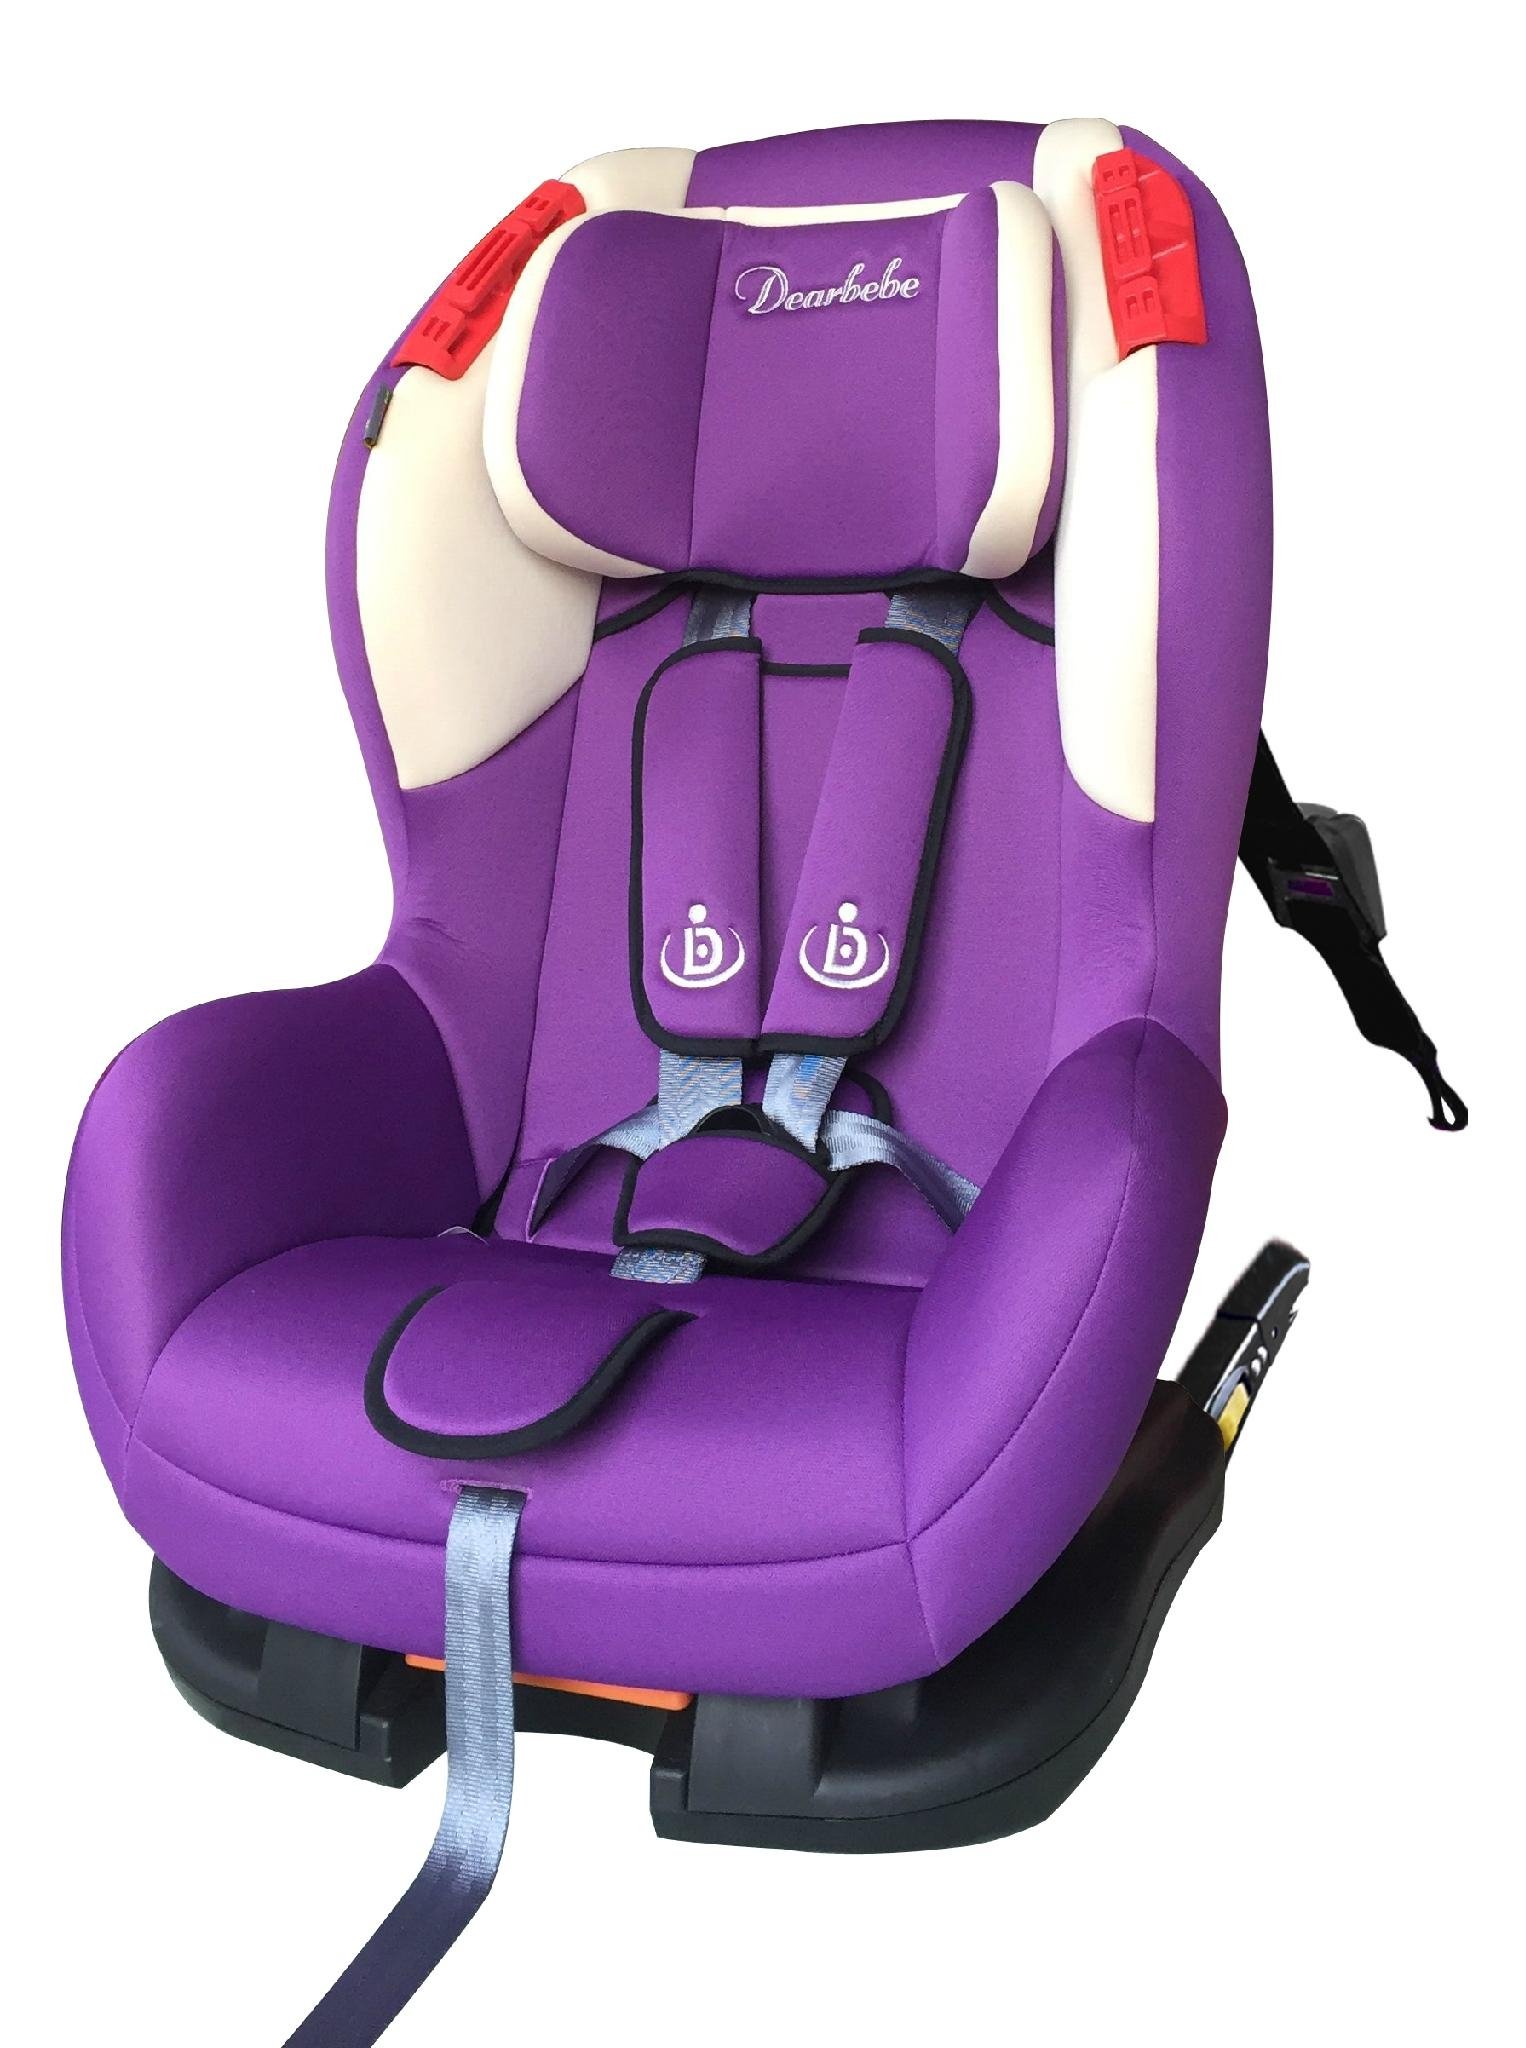 Child Restraint System - Isofix + Top Tether